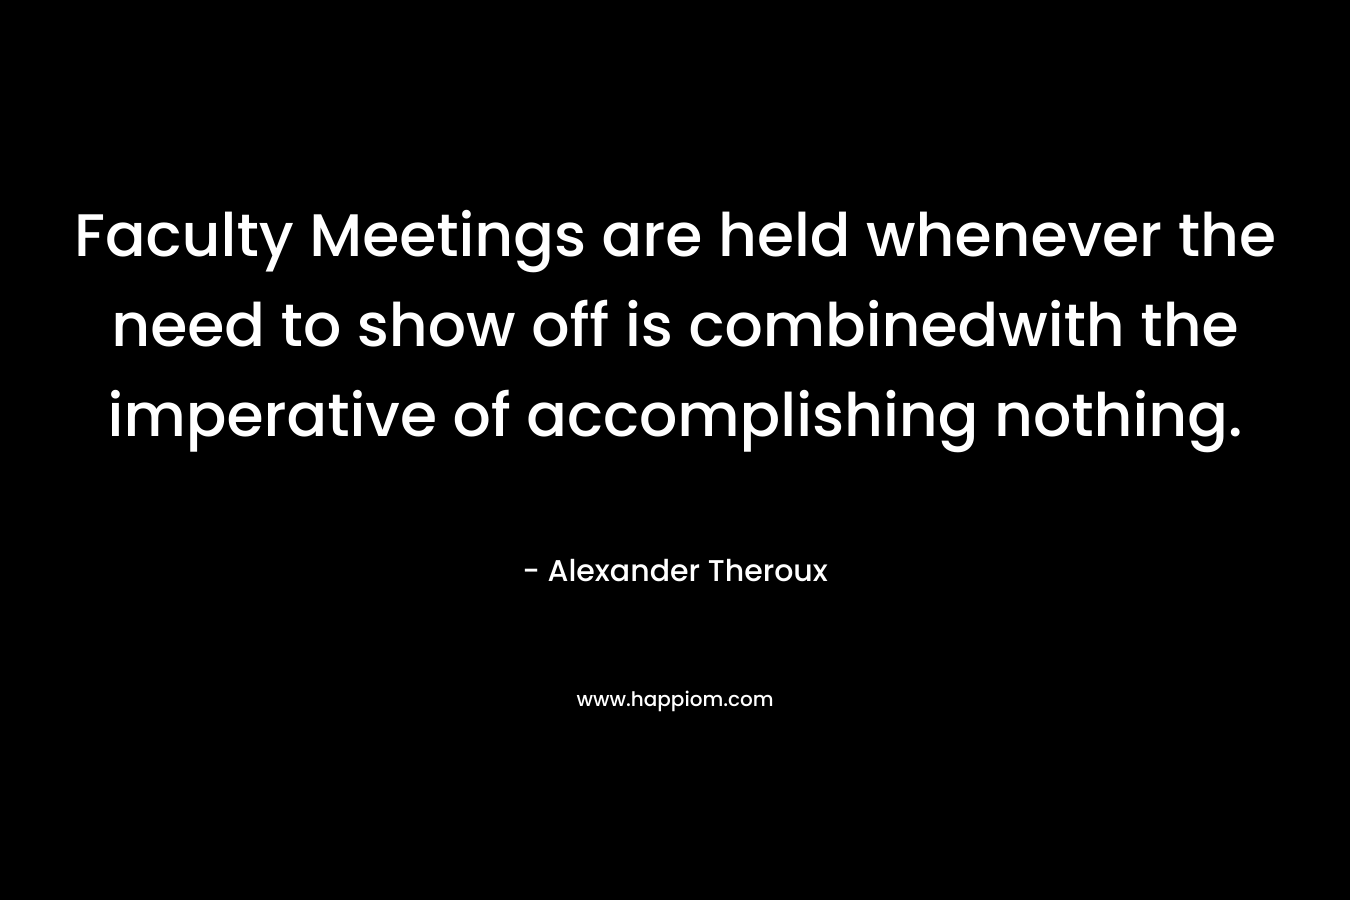 Faculty Meetings are held whenever the need to show off is combinedwith the imperative of accomplishing nothing.